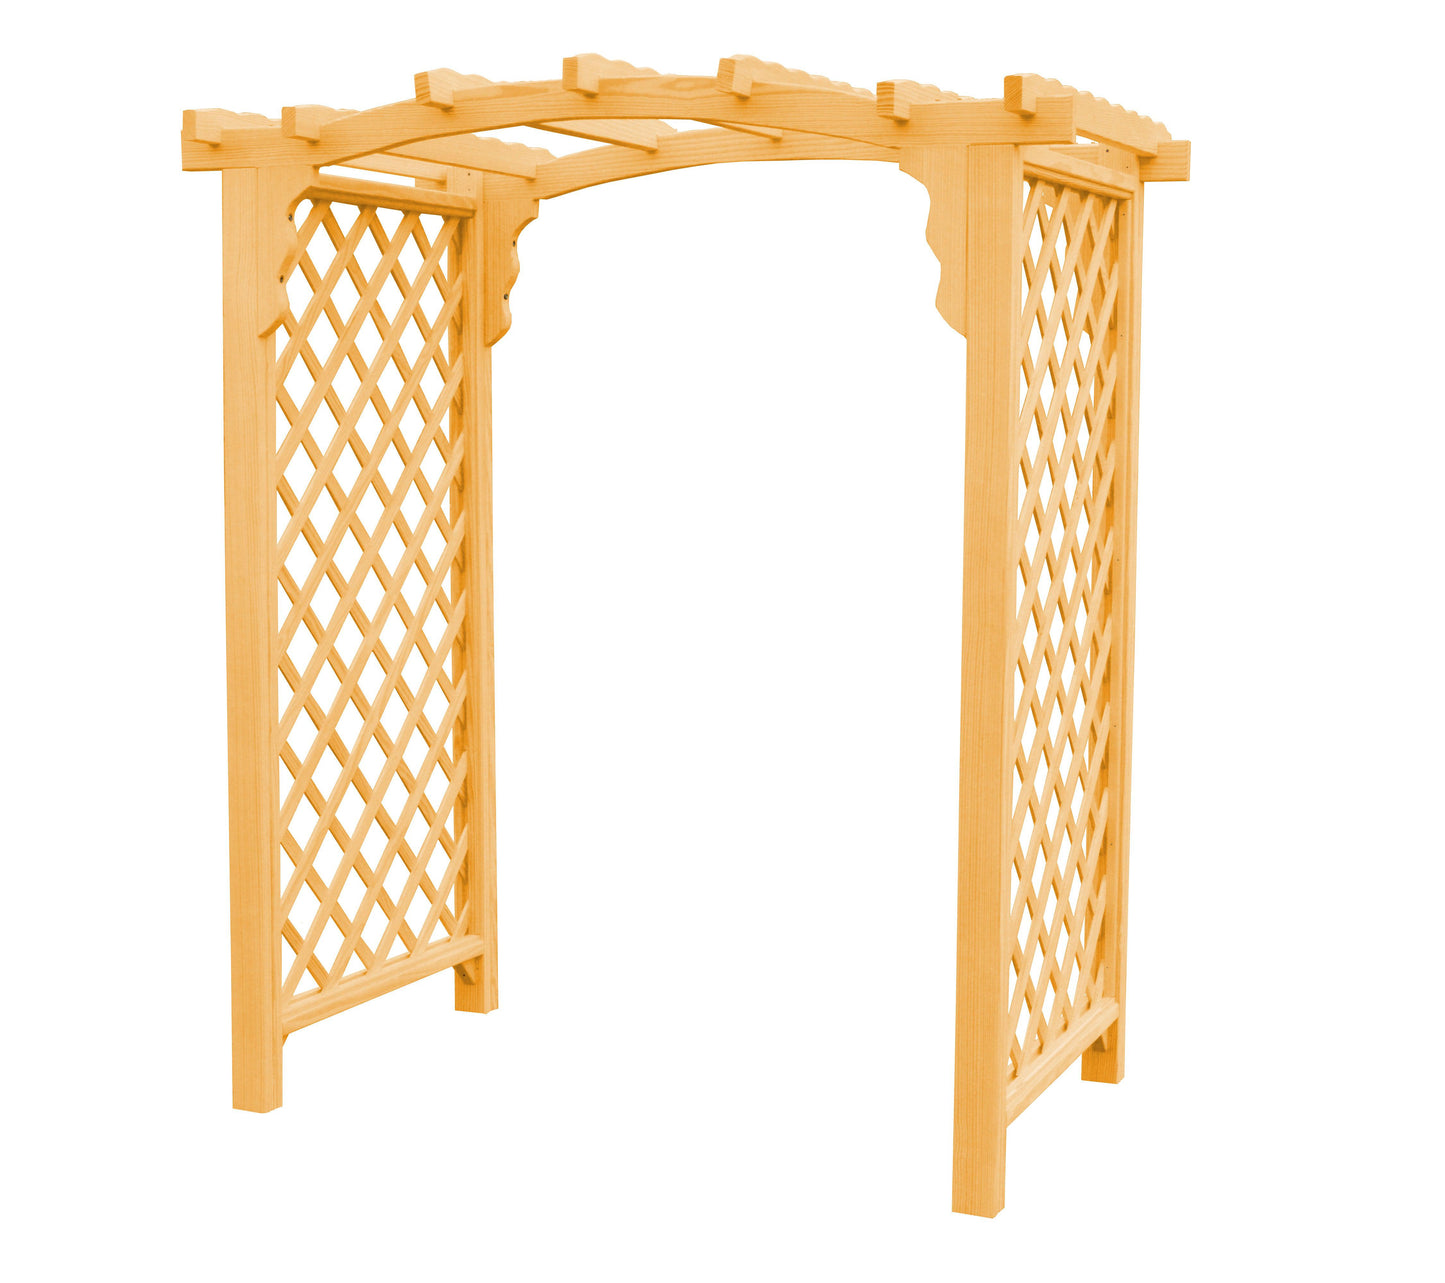 A&L FURNITURE CO. 5' Jamesport Pressure Treated Pine Arbor - LEAD TIME TO SHIP 10 BUSINESS DAYS